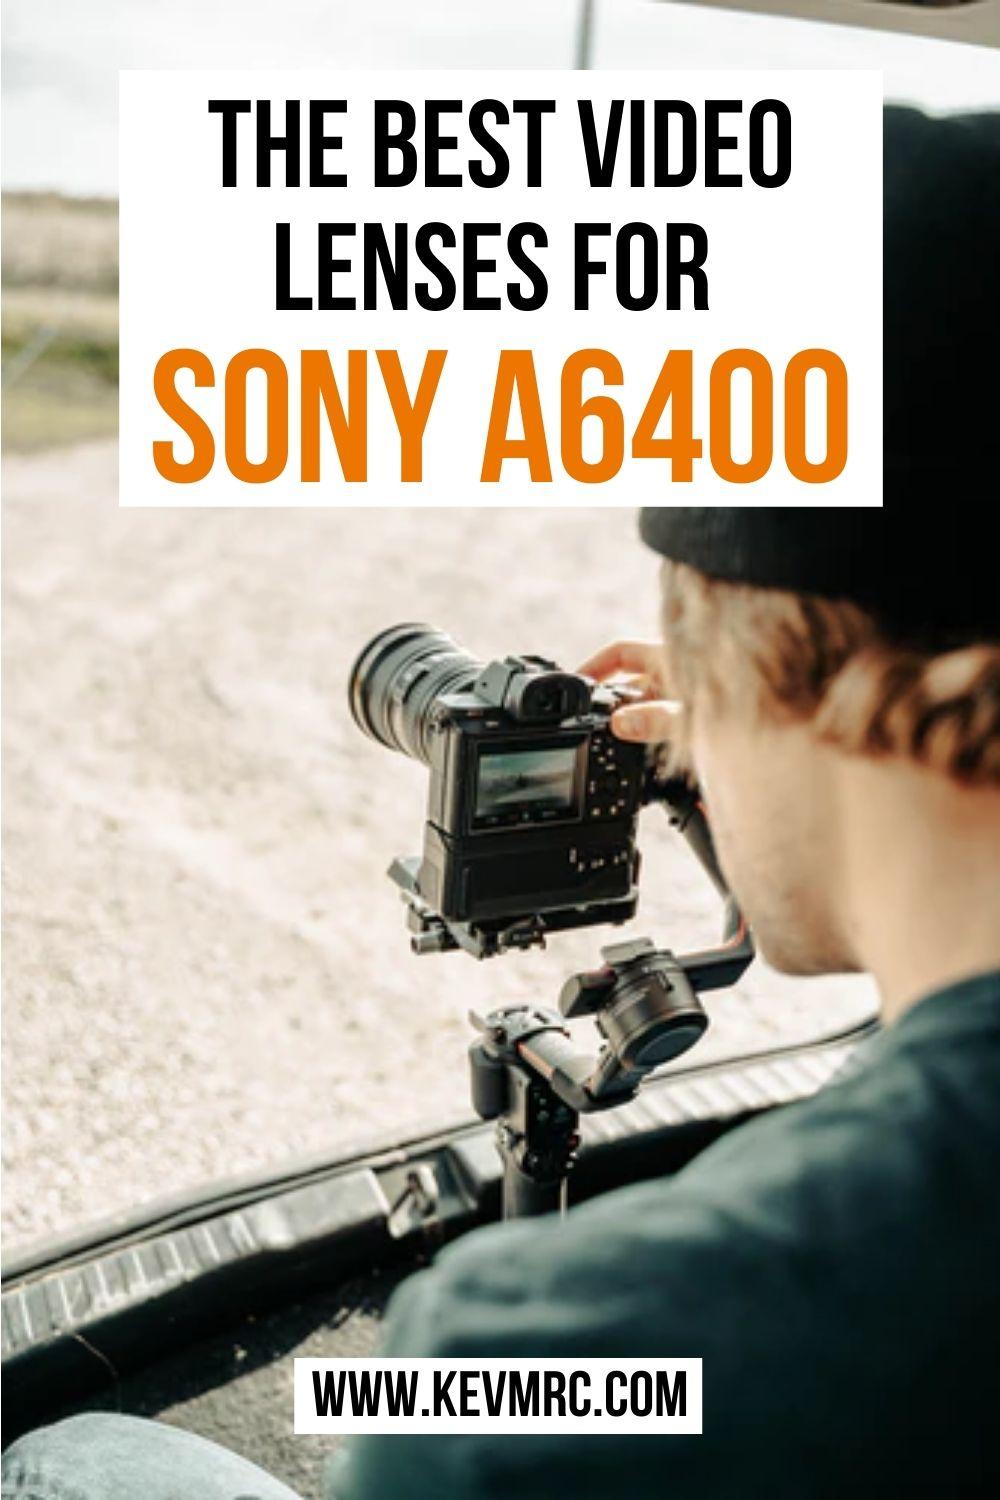 Find the best video lens for Sony A6400. camera lens guide | photo guide | best sony lenses | photography gear 